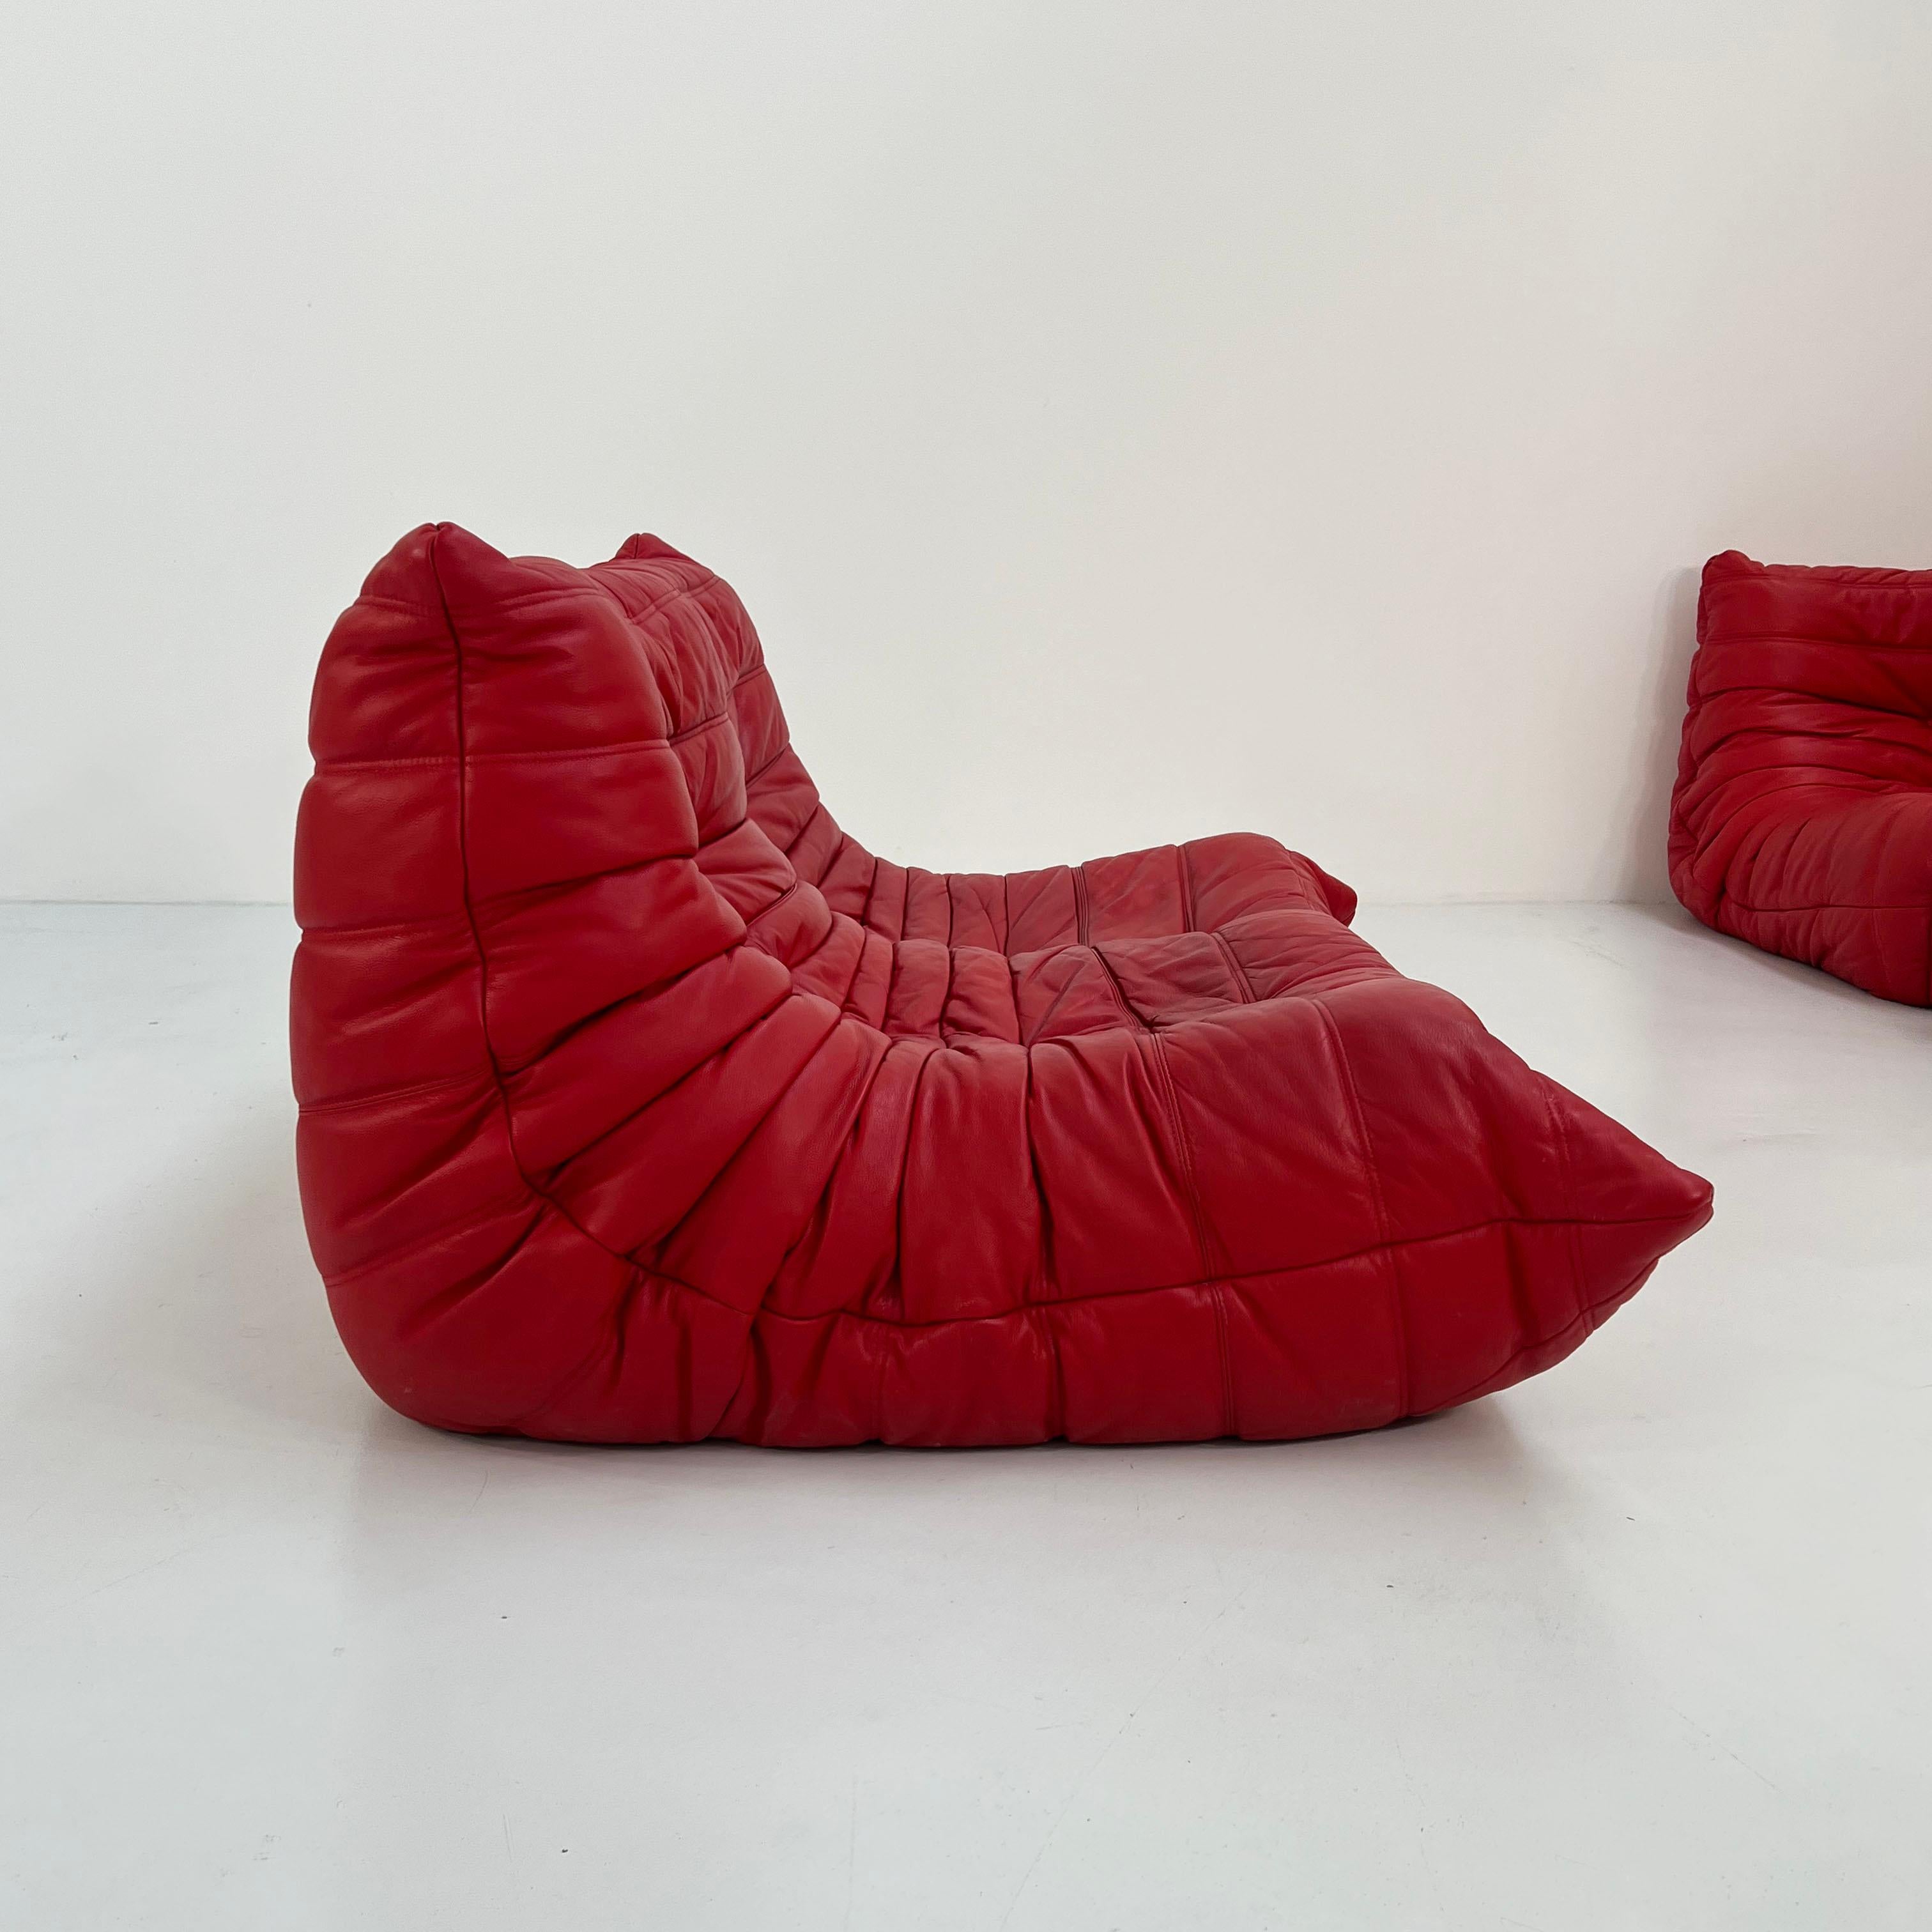 Togo Sofa Set in Red Leather by Michel Ducaroy for Ligne Roset, 1970s For Sale 3